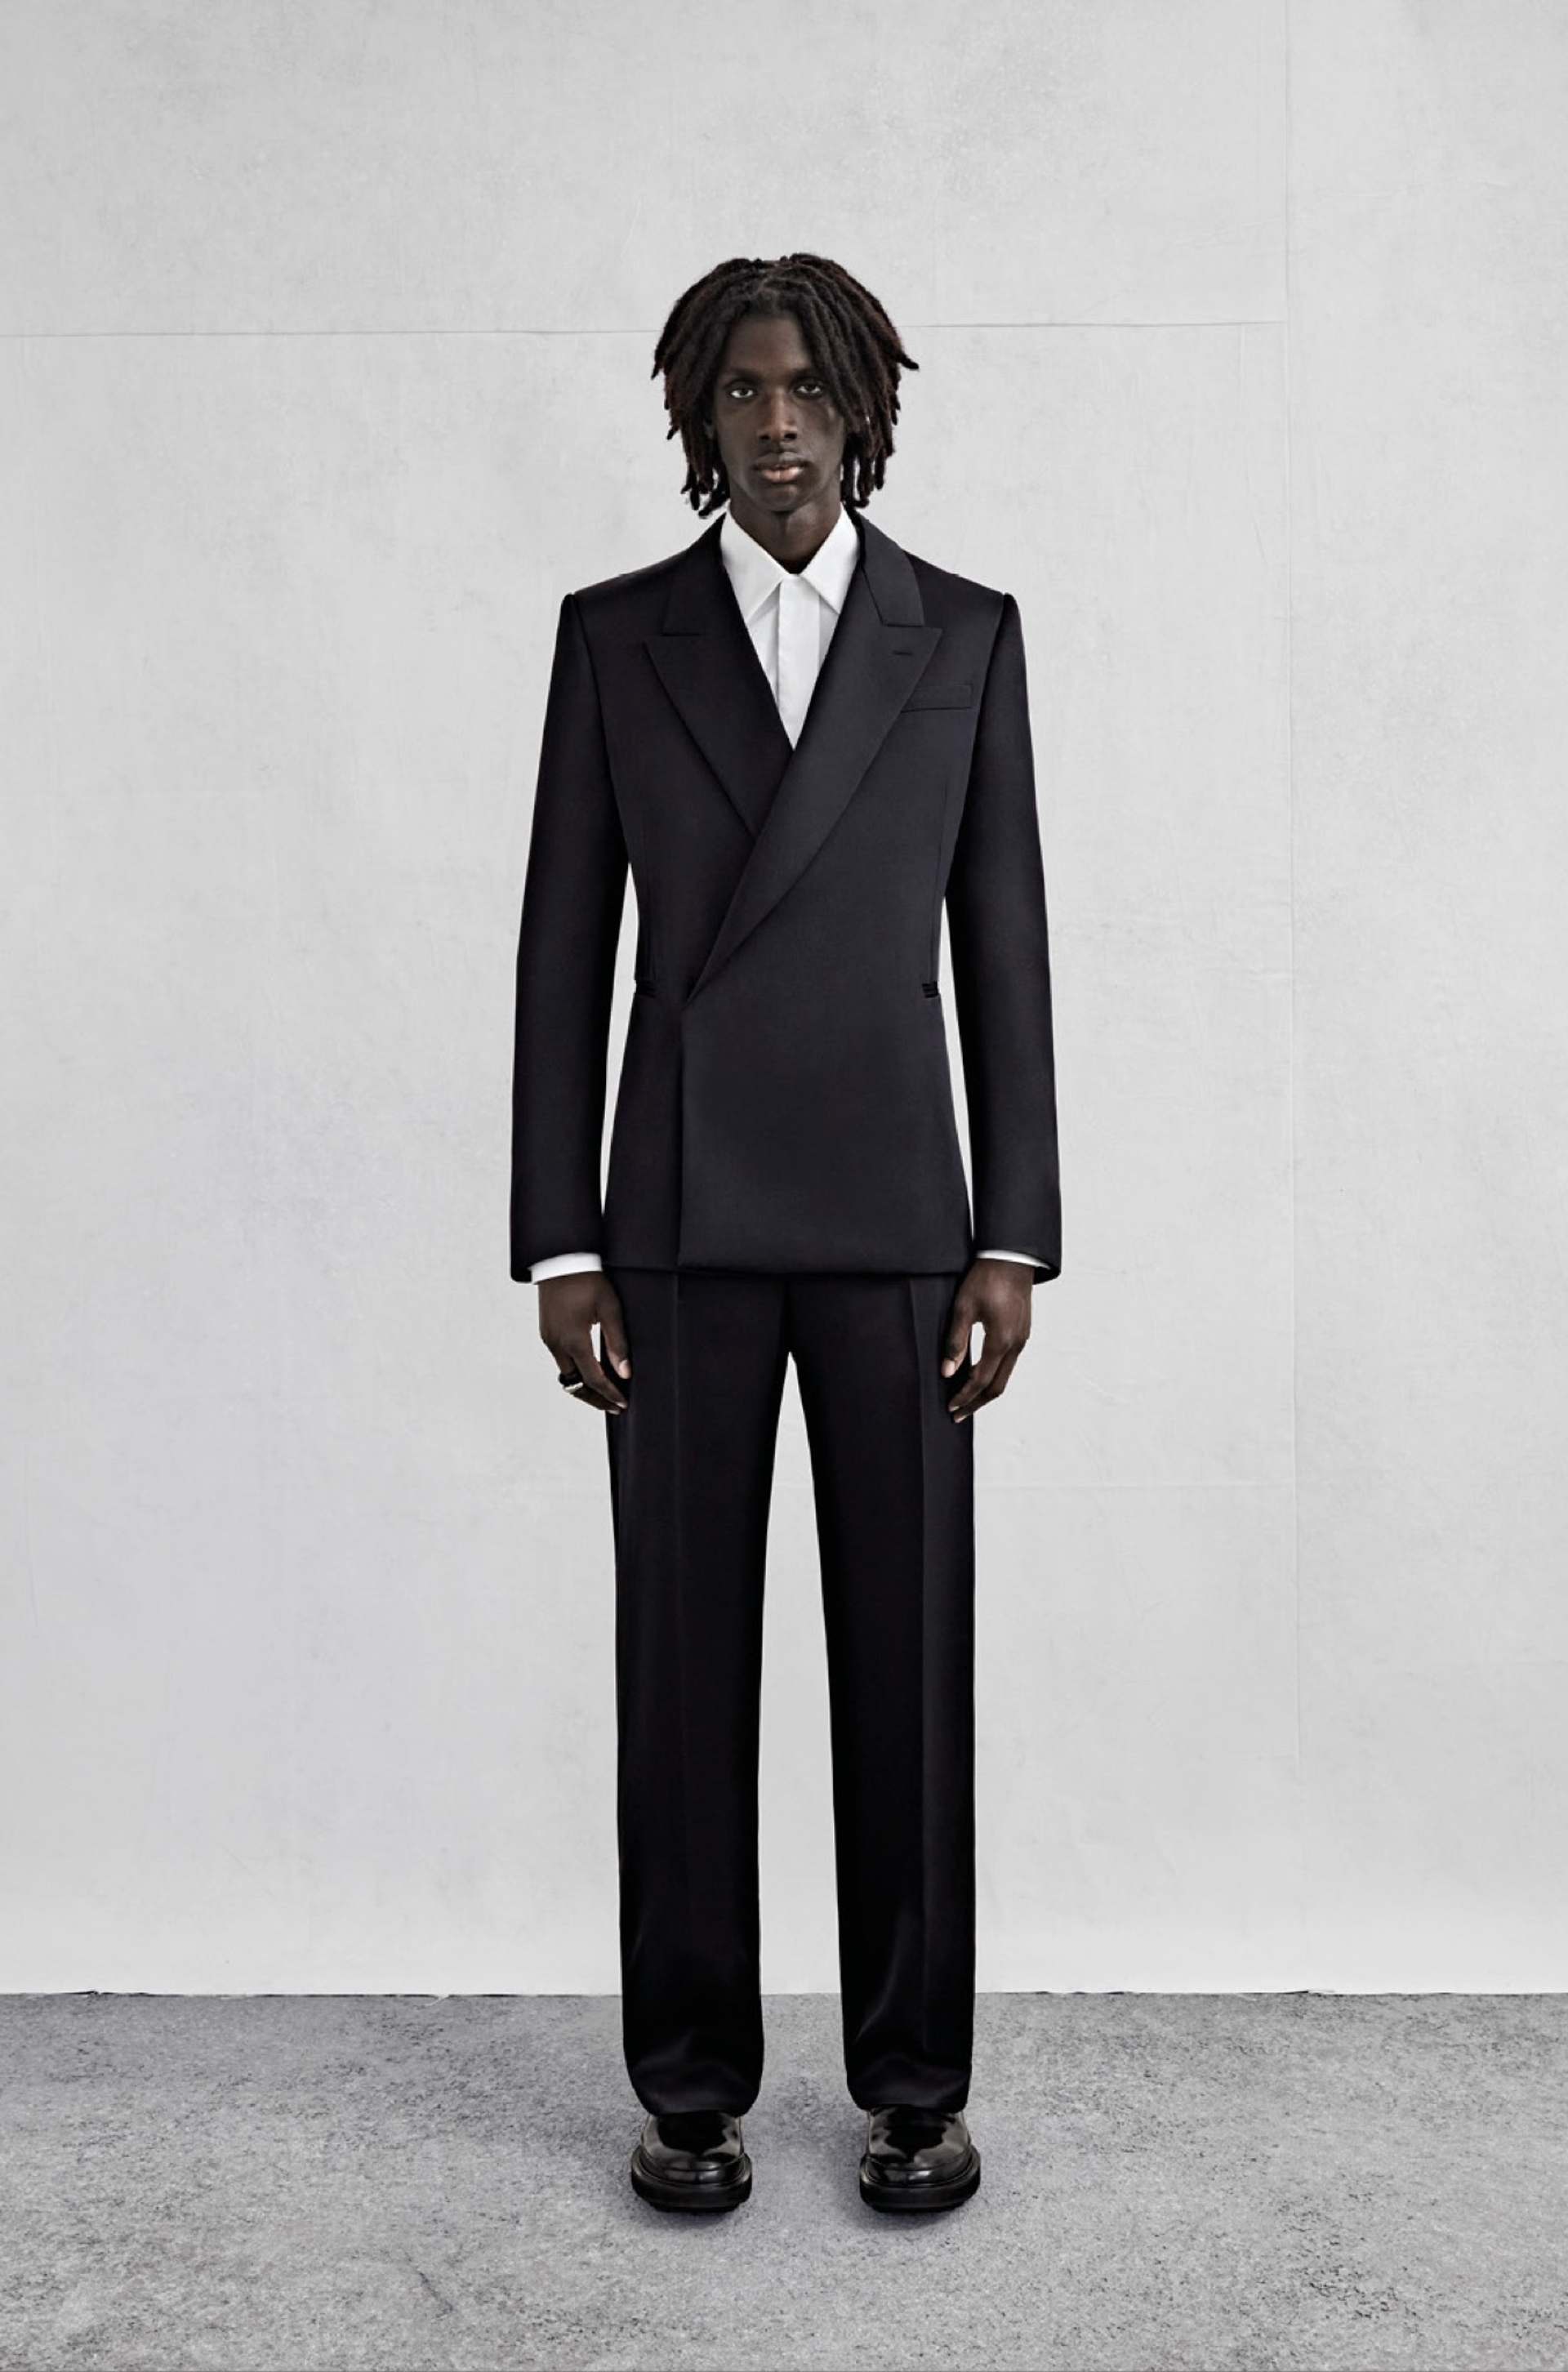 A double-breasted tailored jacket in black fluid twill, a shirt in white cotton poplin and wide-legged trousers in black fluid twill.